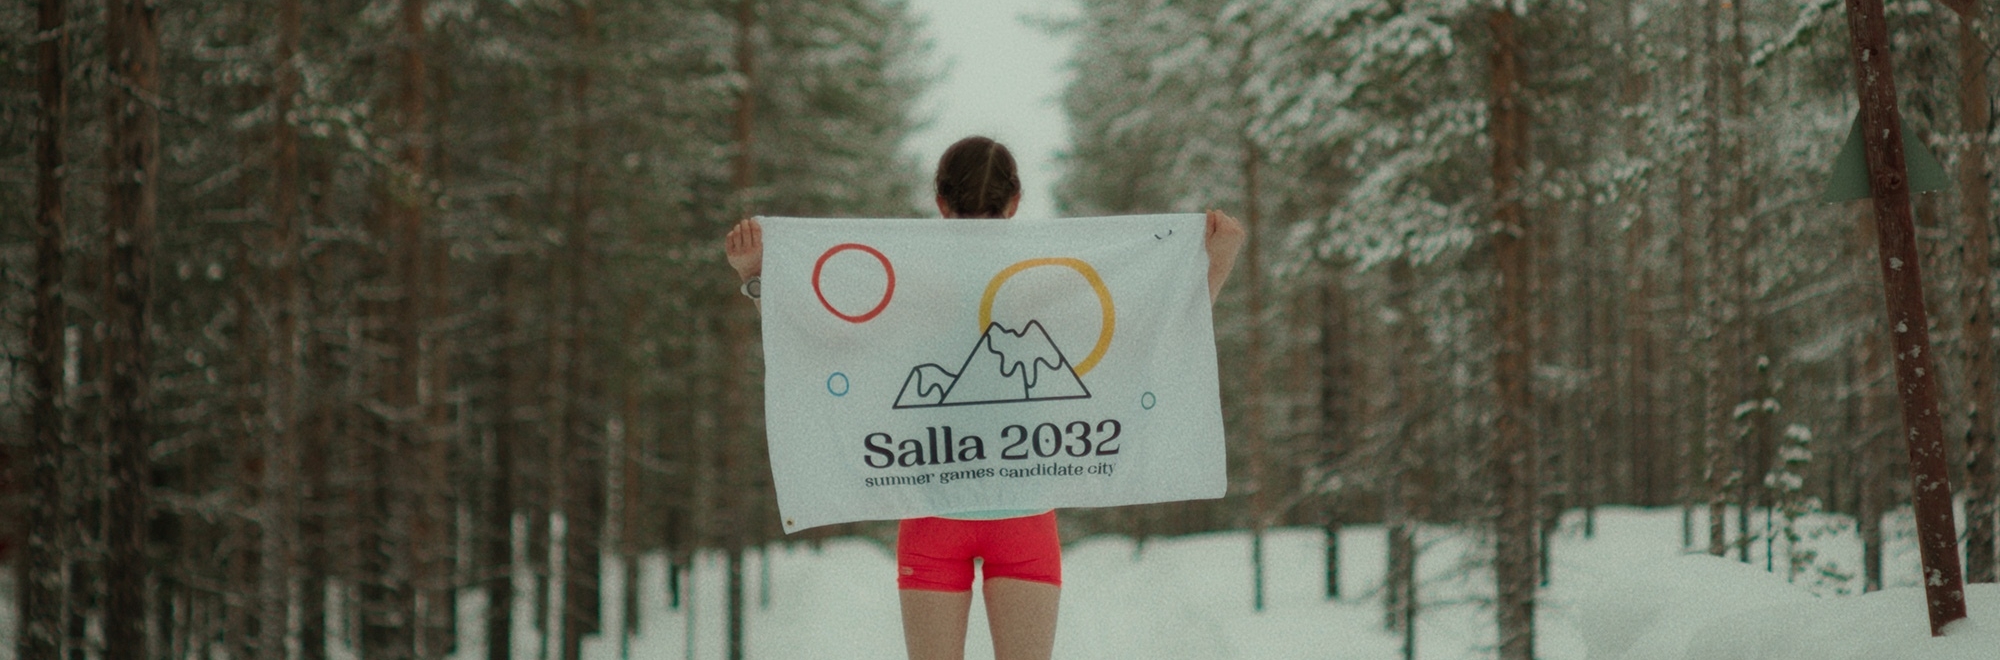 One of the coldest places on earth bids for 2032 Summer Games